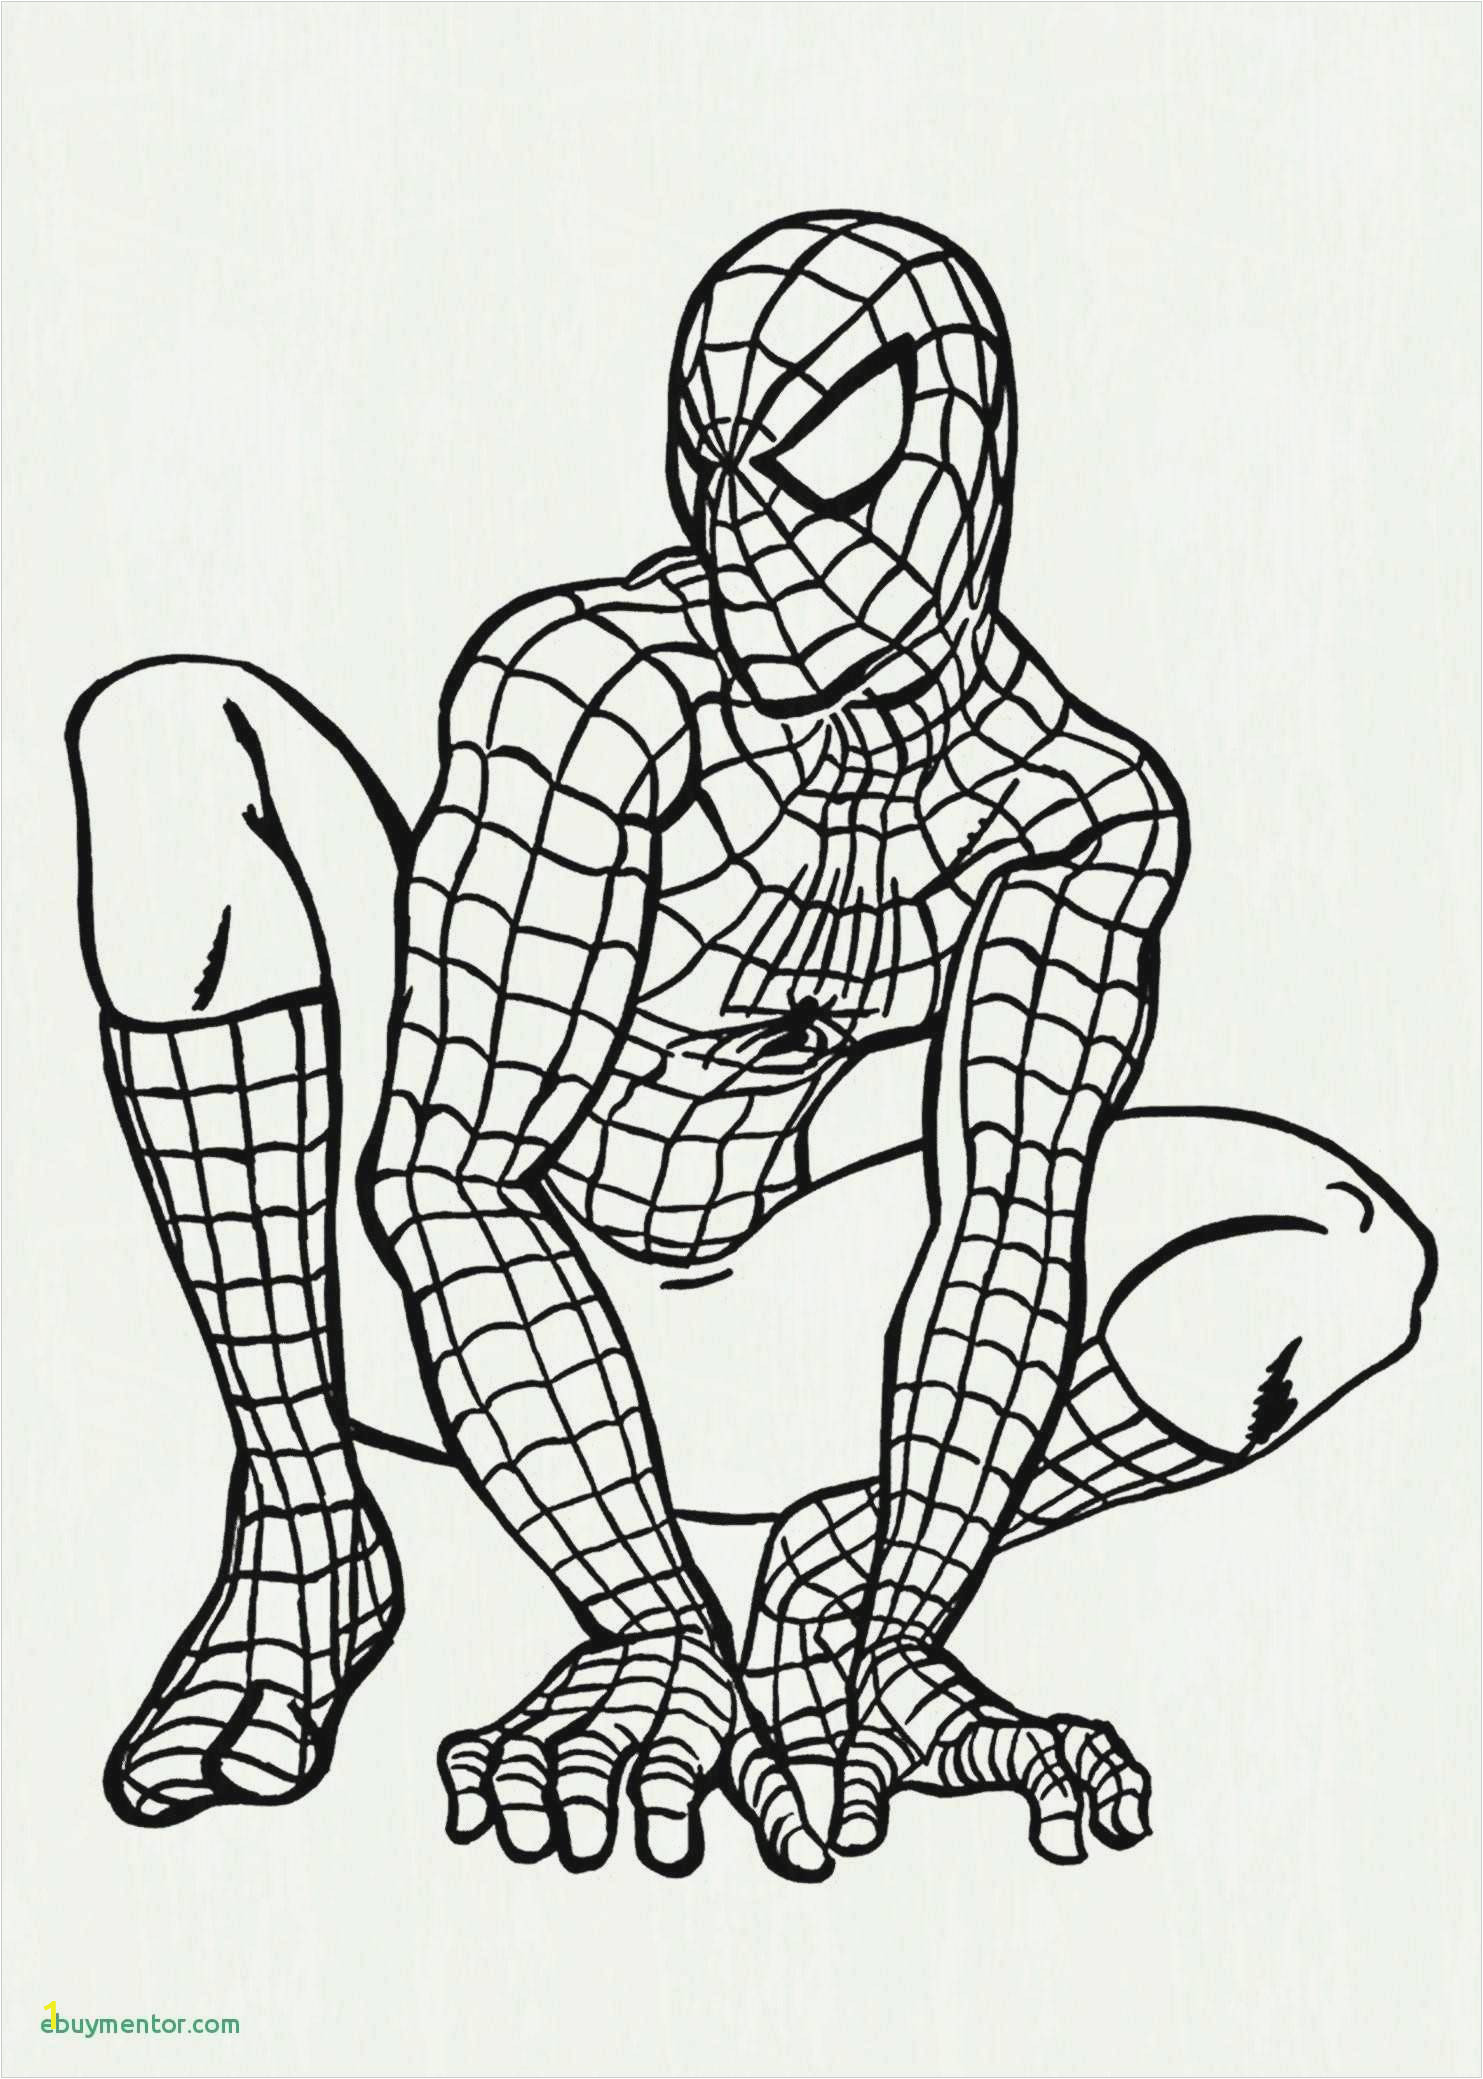 Disney Print Coloring Pages New Coloring Pages Superhero Printable Fresh 0 0d